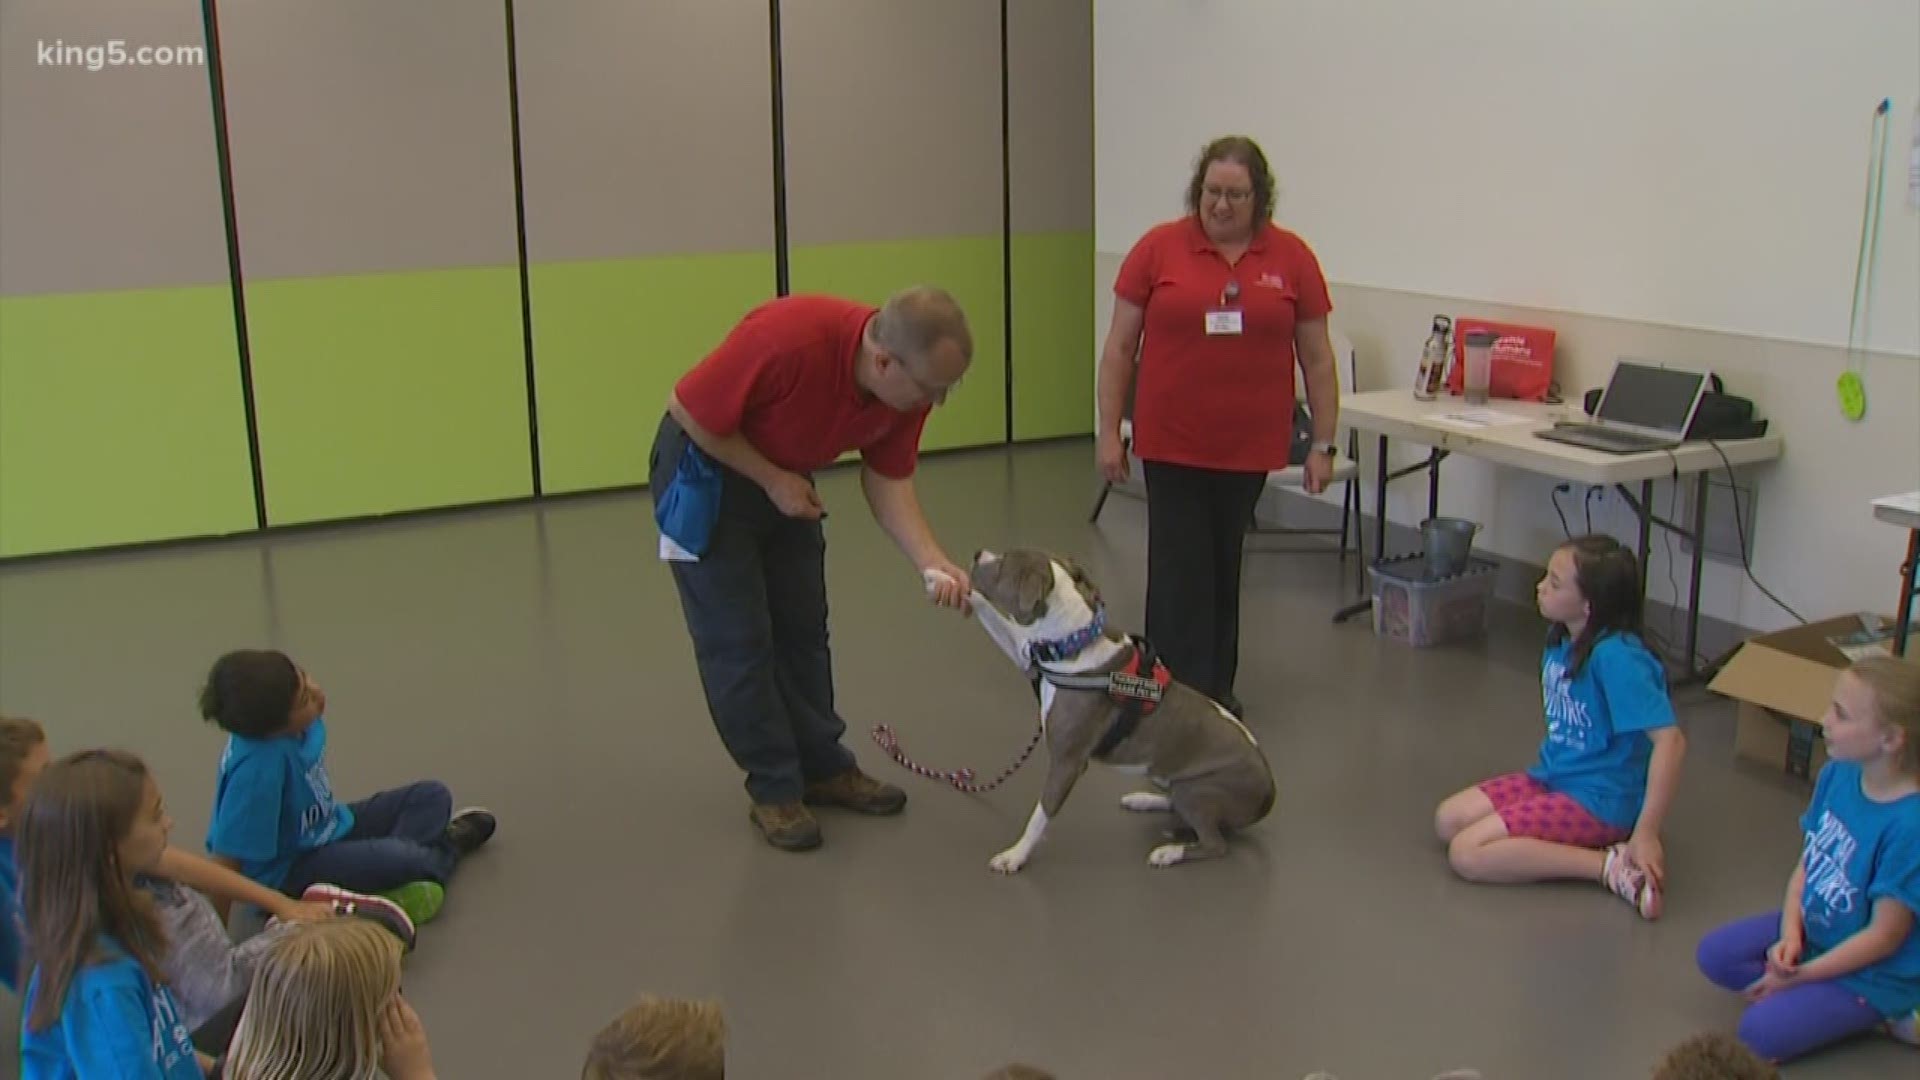 Seattle Humane believes in teaching the next generation about humane animal care. It offers summer camps right at the shelter for fun and learning.